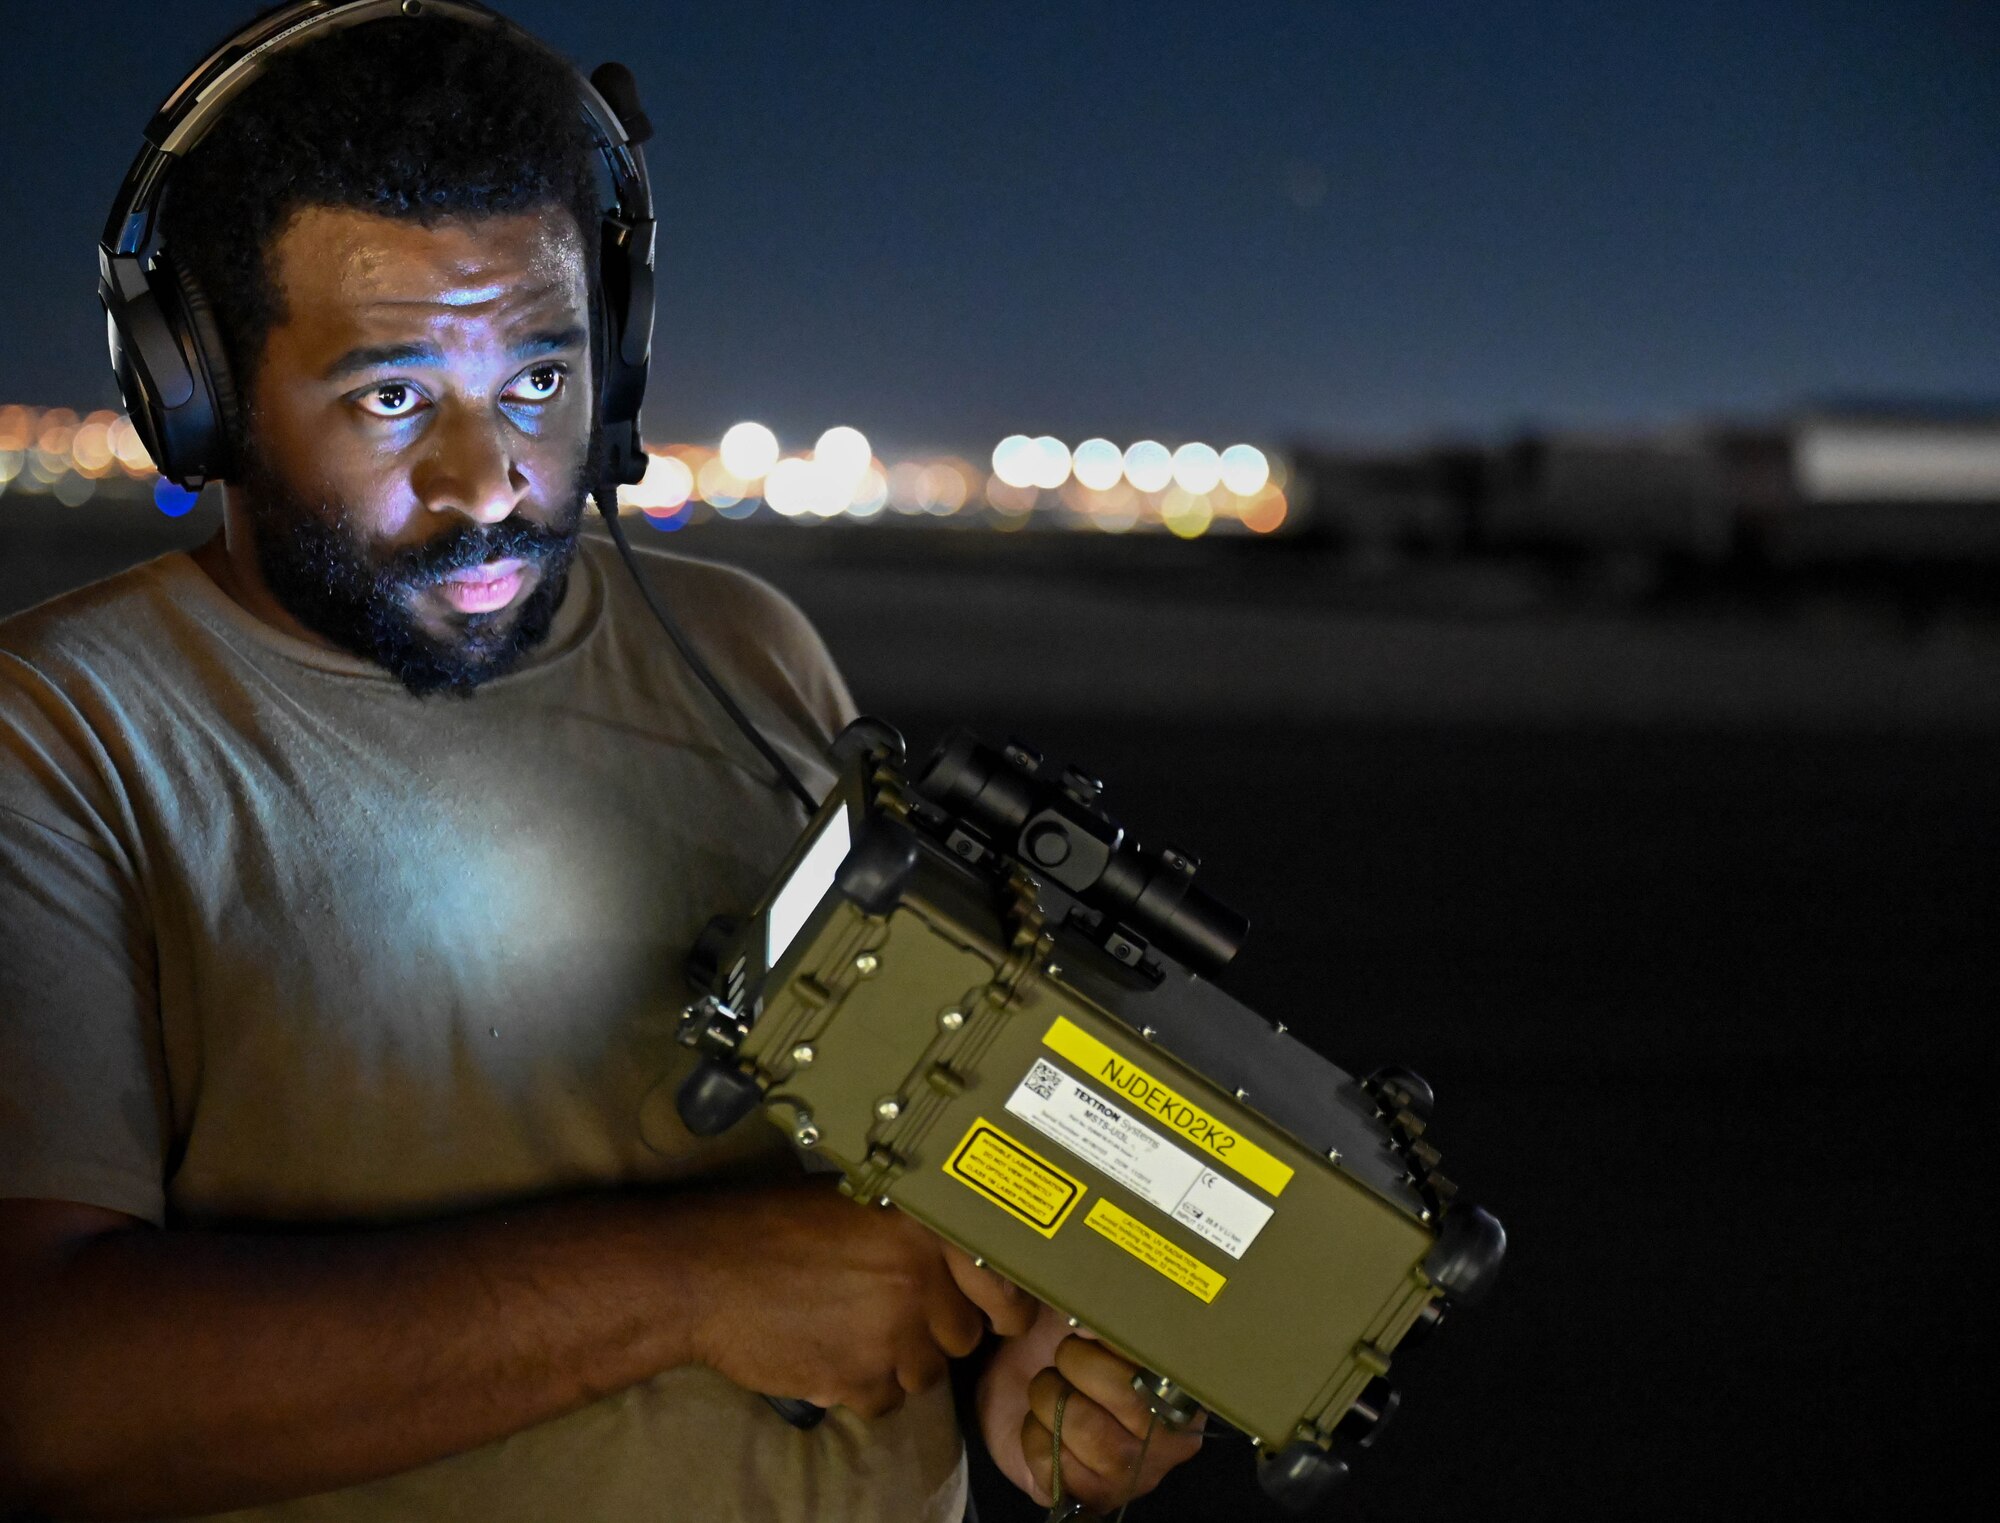 U.S. Air Force Staff Sgt. Malik Williams, 87th Electronic Warfare Squadron COMBAT SHIELD avionics electronic warfare journeyman, prepares to conduct a missile systems operations check during Red Flag 23-3 at Nellis Air Force Base, Nev., July 14, 2023. The 87th EWS participated in Red Flag 23-3 as part of COMBAT SHIELD, an assessment of the Combat Air Force’s platforms to evaluate electronic warfare readiness. (U.S. Air Force photo by Capt. Benjamin Aronson)